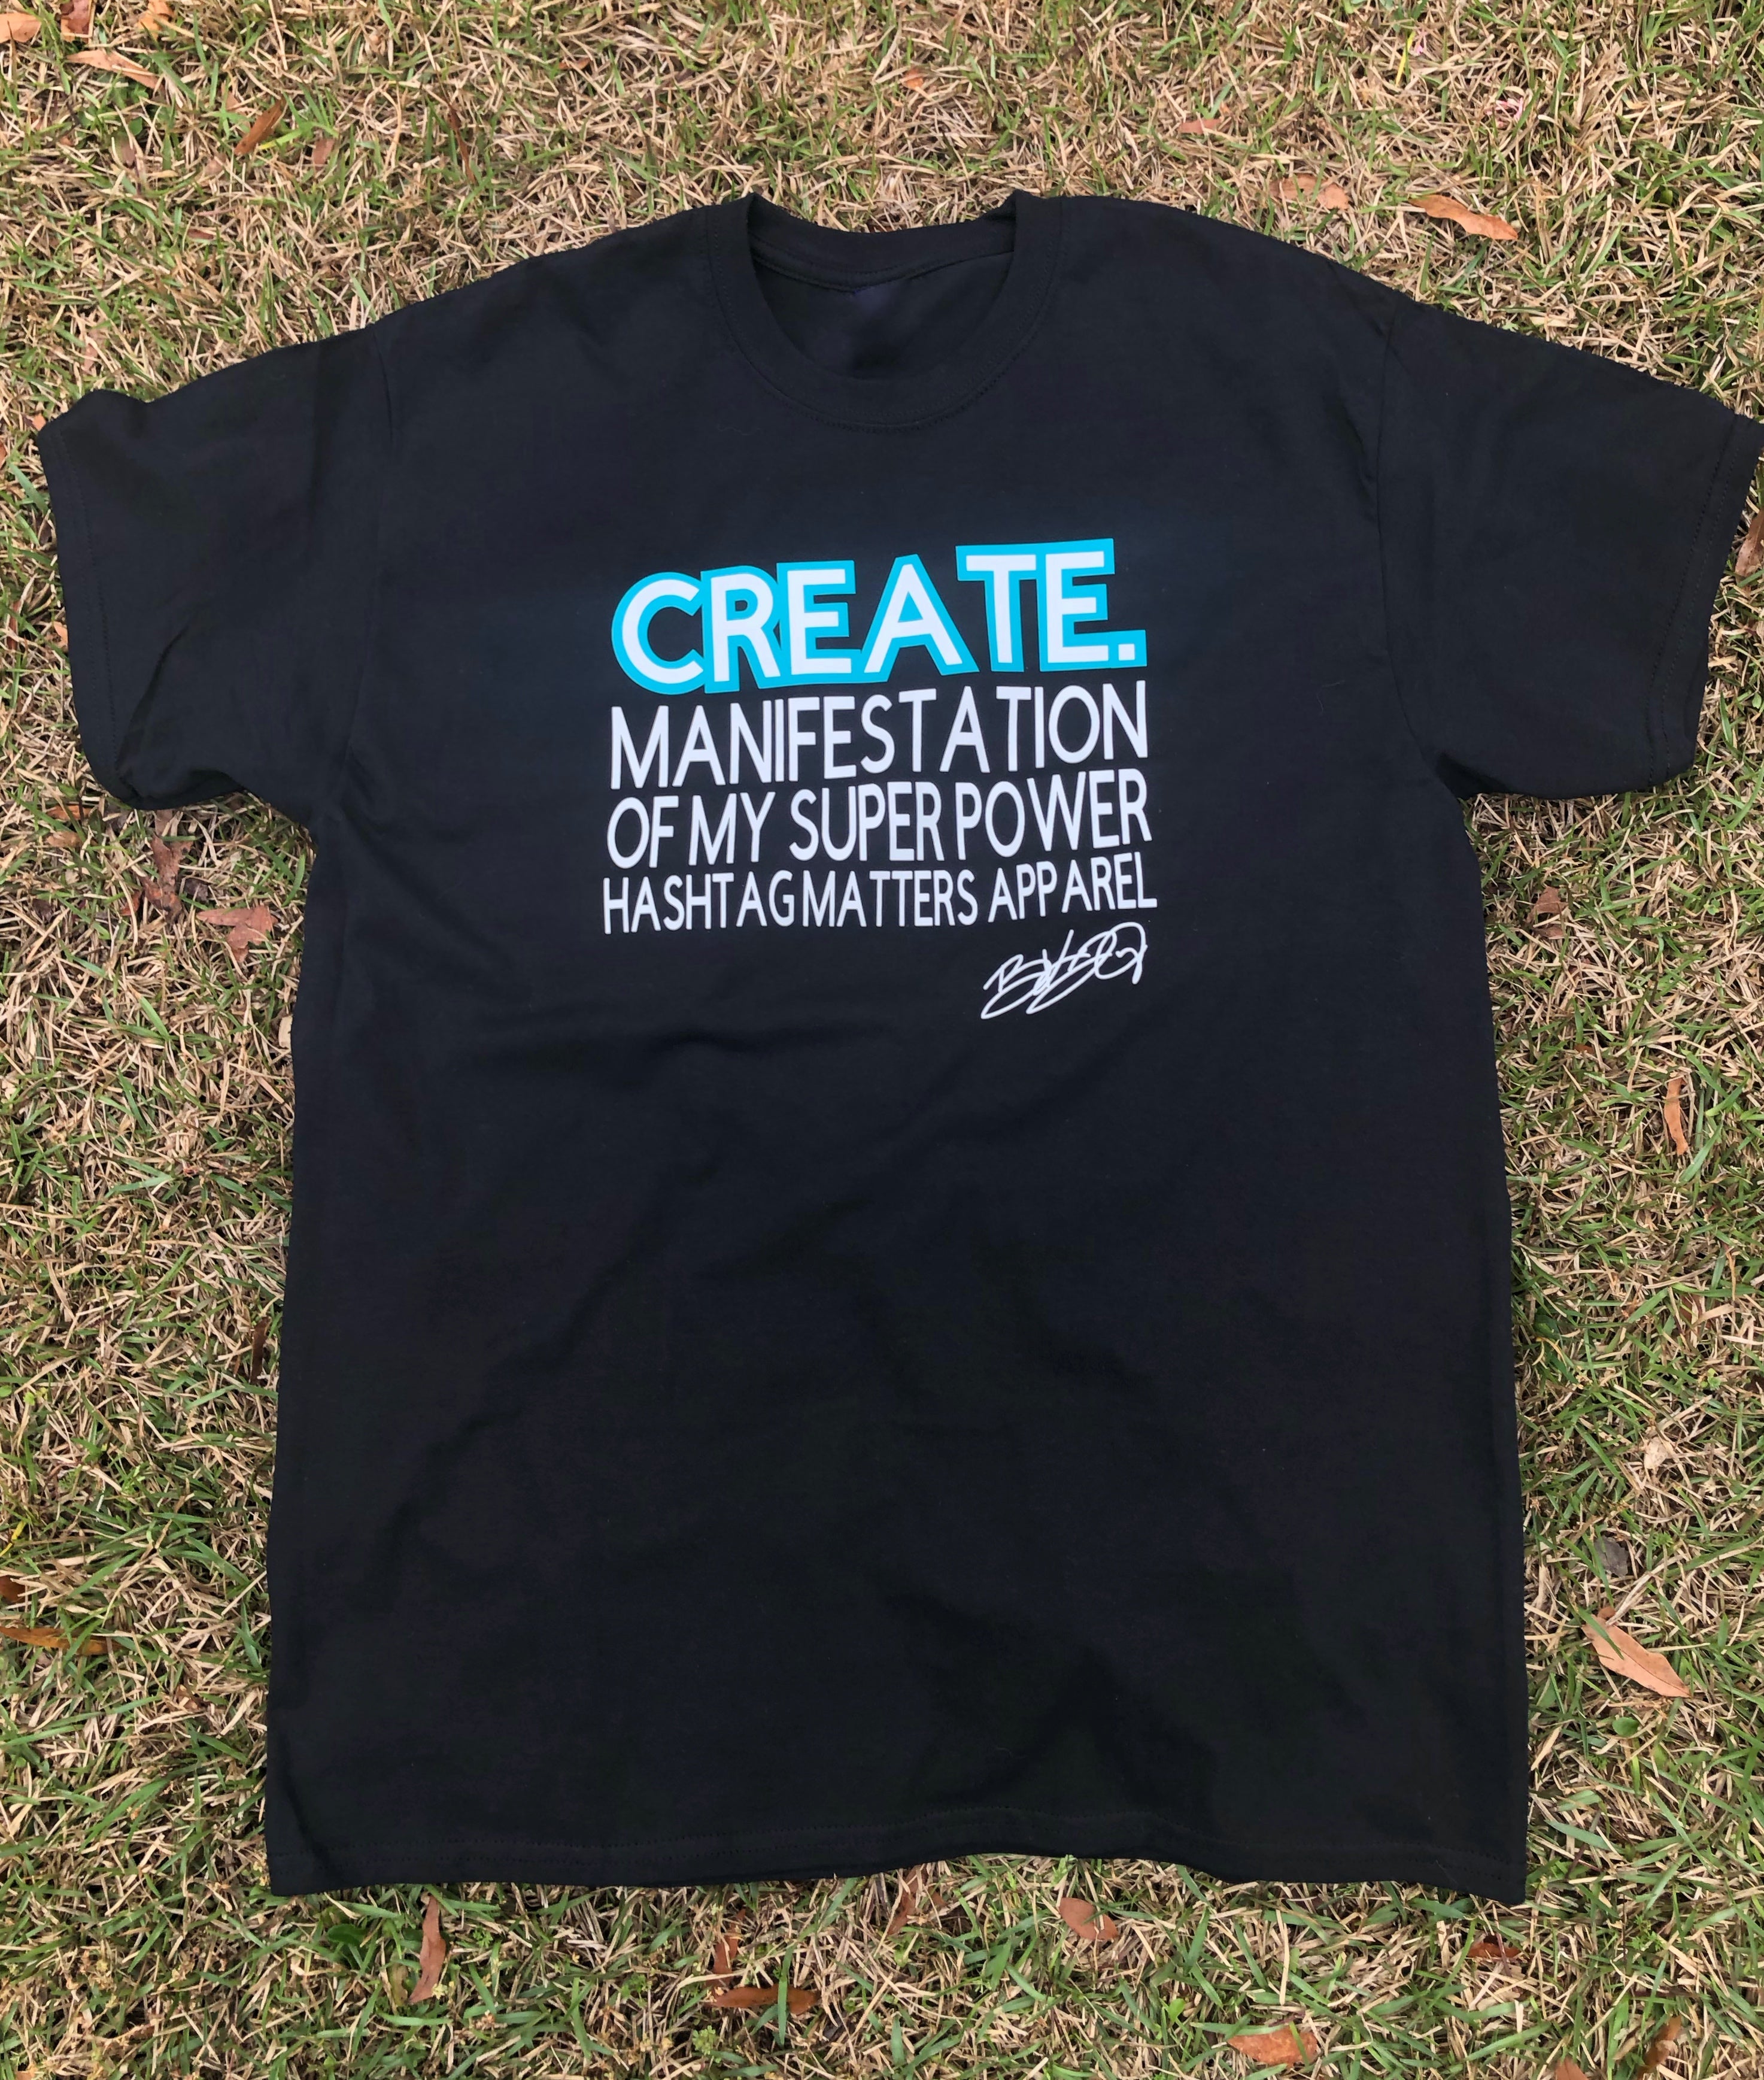 Create. Hashtag Matters (Quote) T-shirt